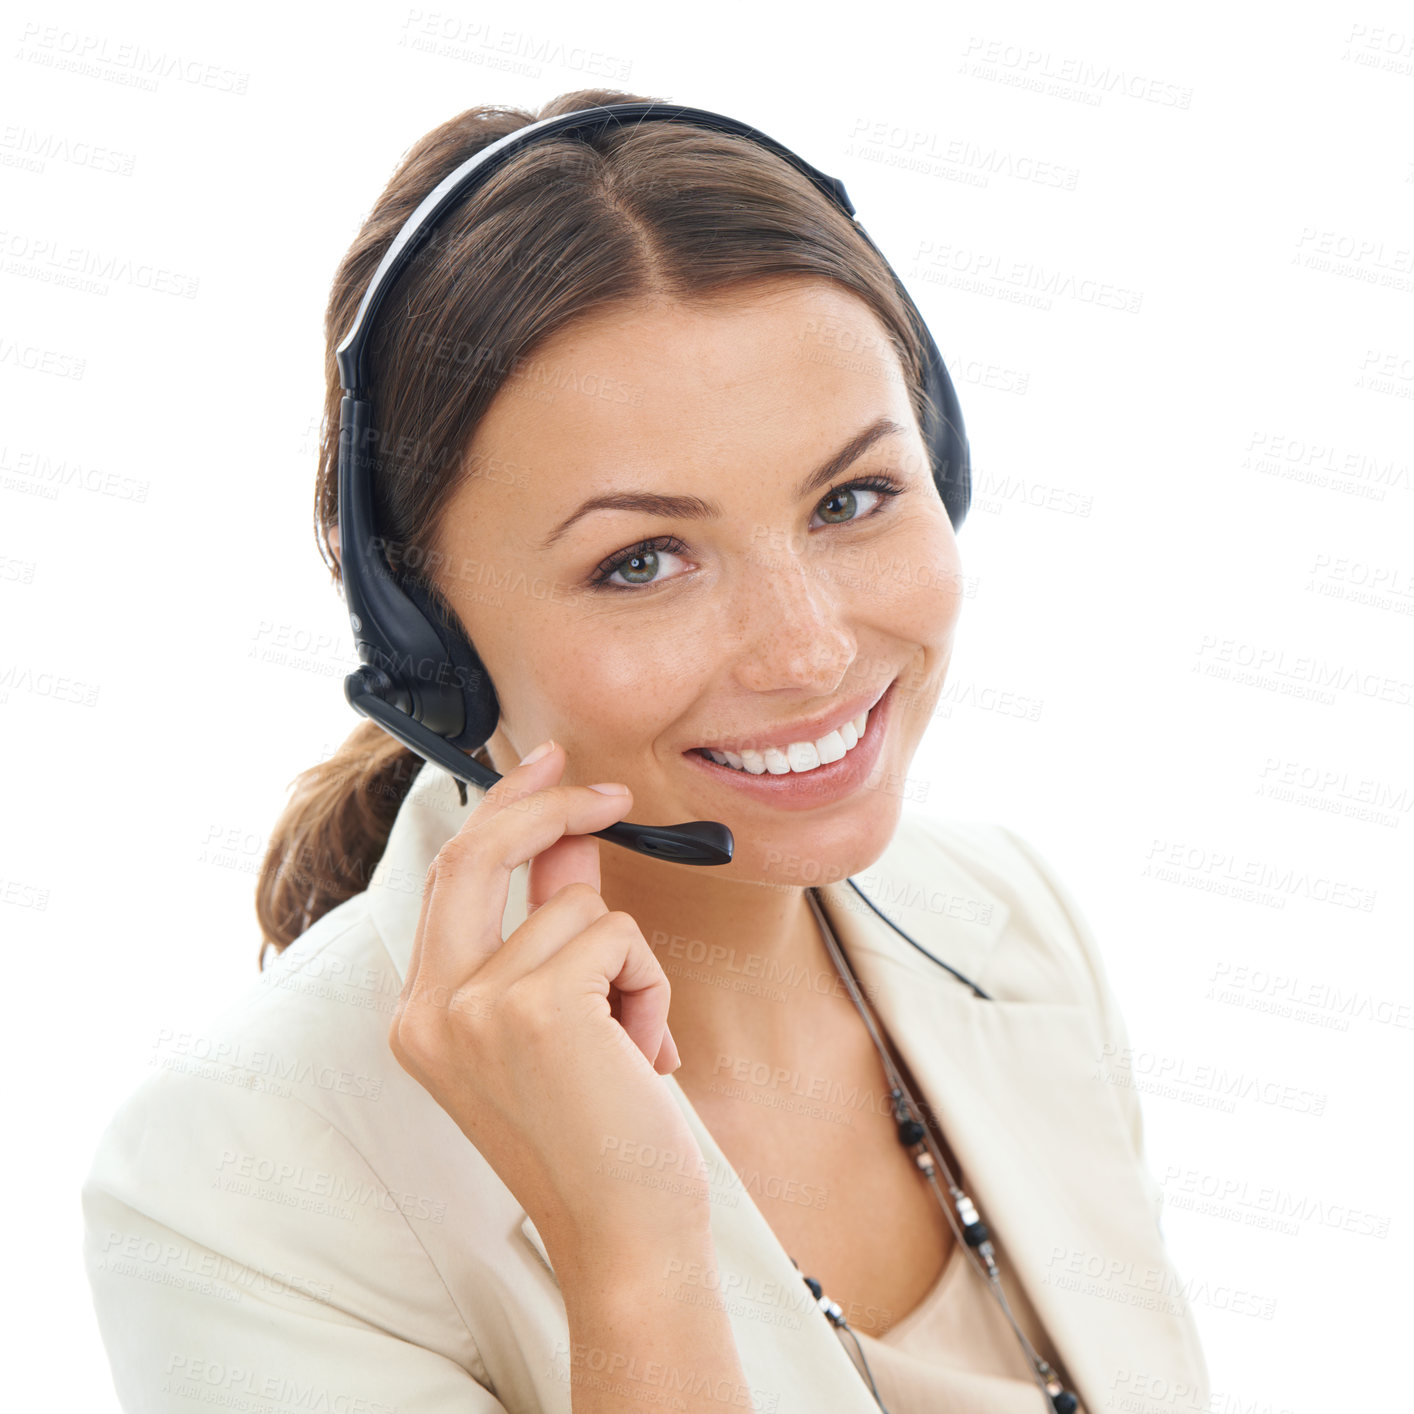 Buy stock photo A beautiful young receptionist wearing a headset and isolated on a white background